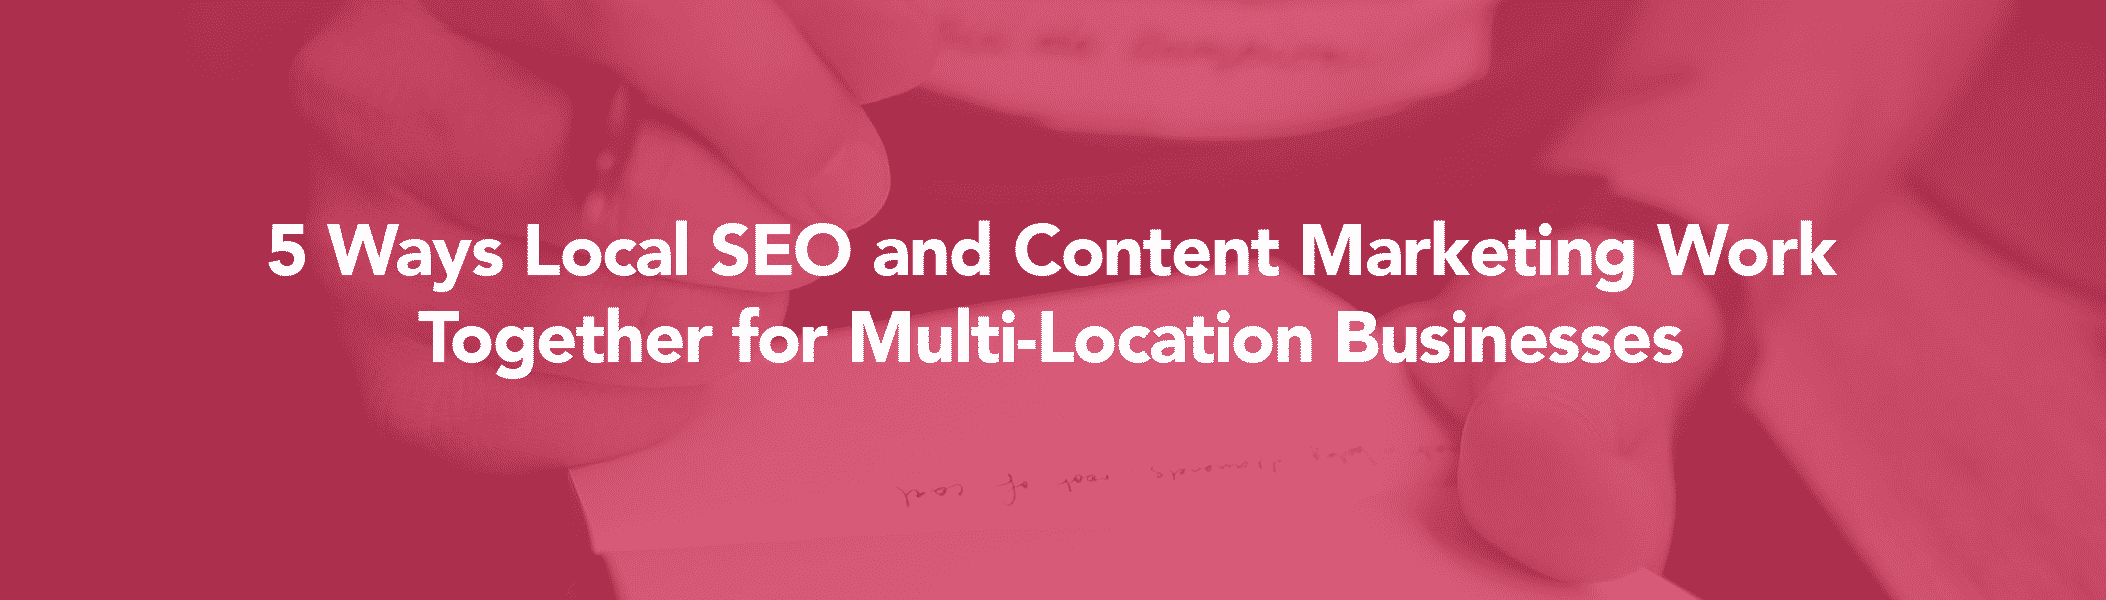 local seo and content marketing